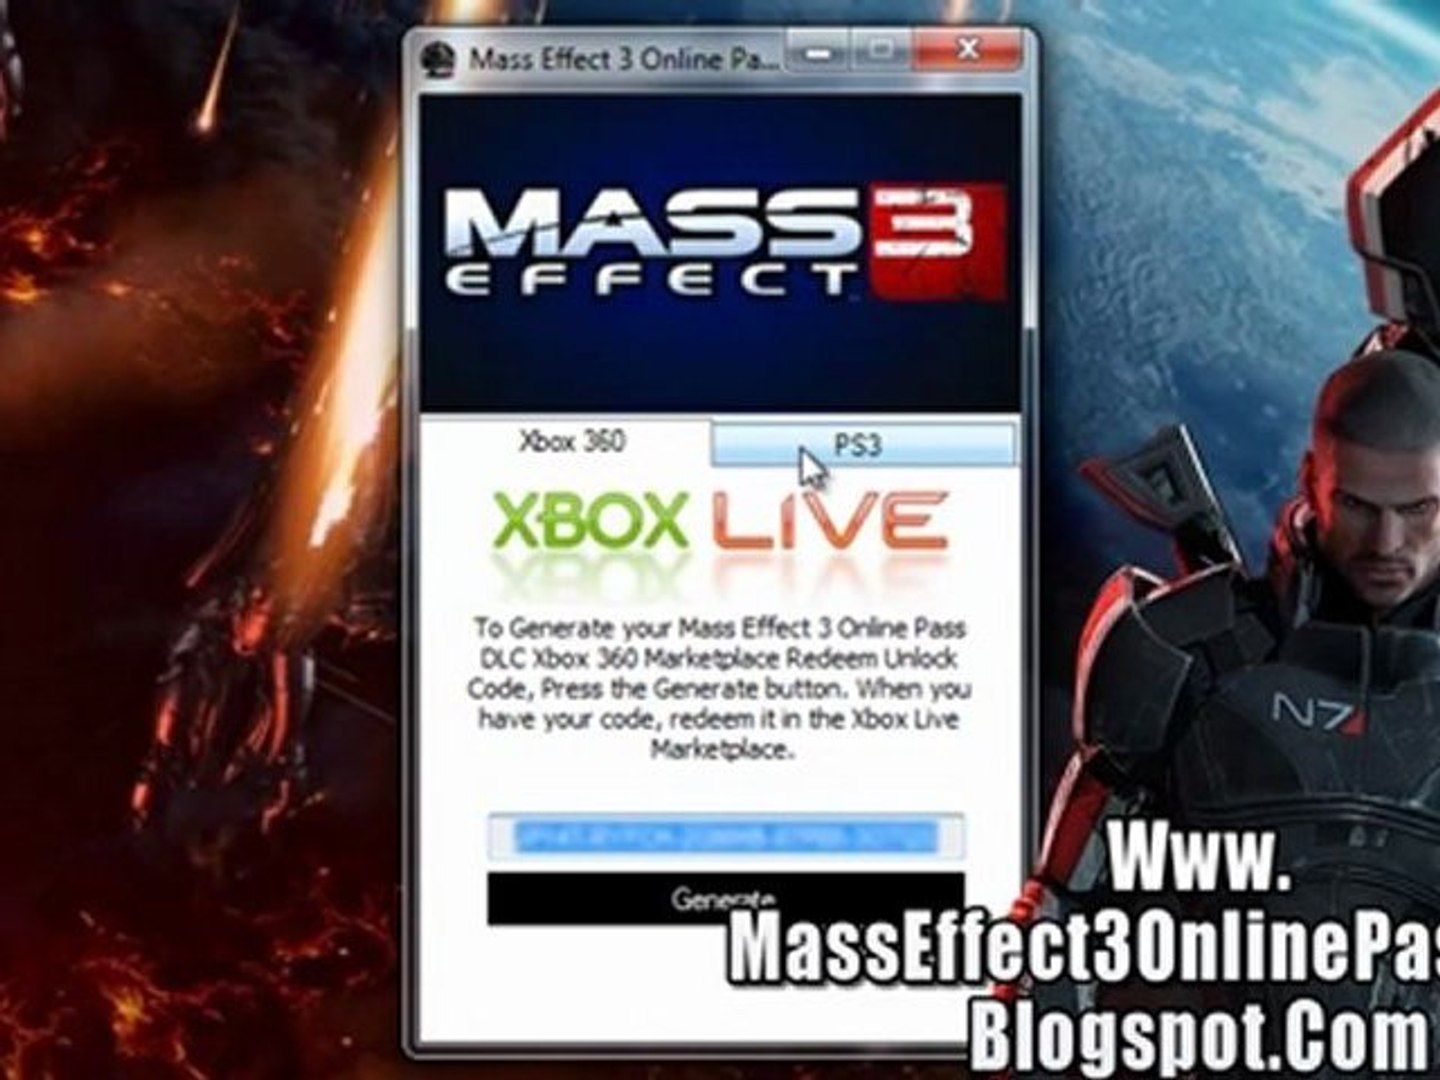 How to Unlock Mass Effect 3 Online Pass Code For Free!! - video Dailymotion